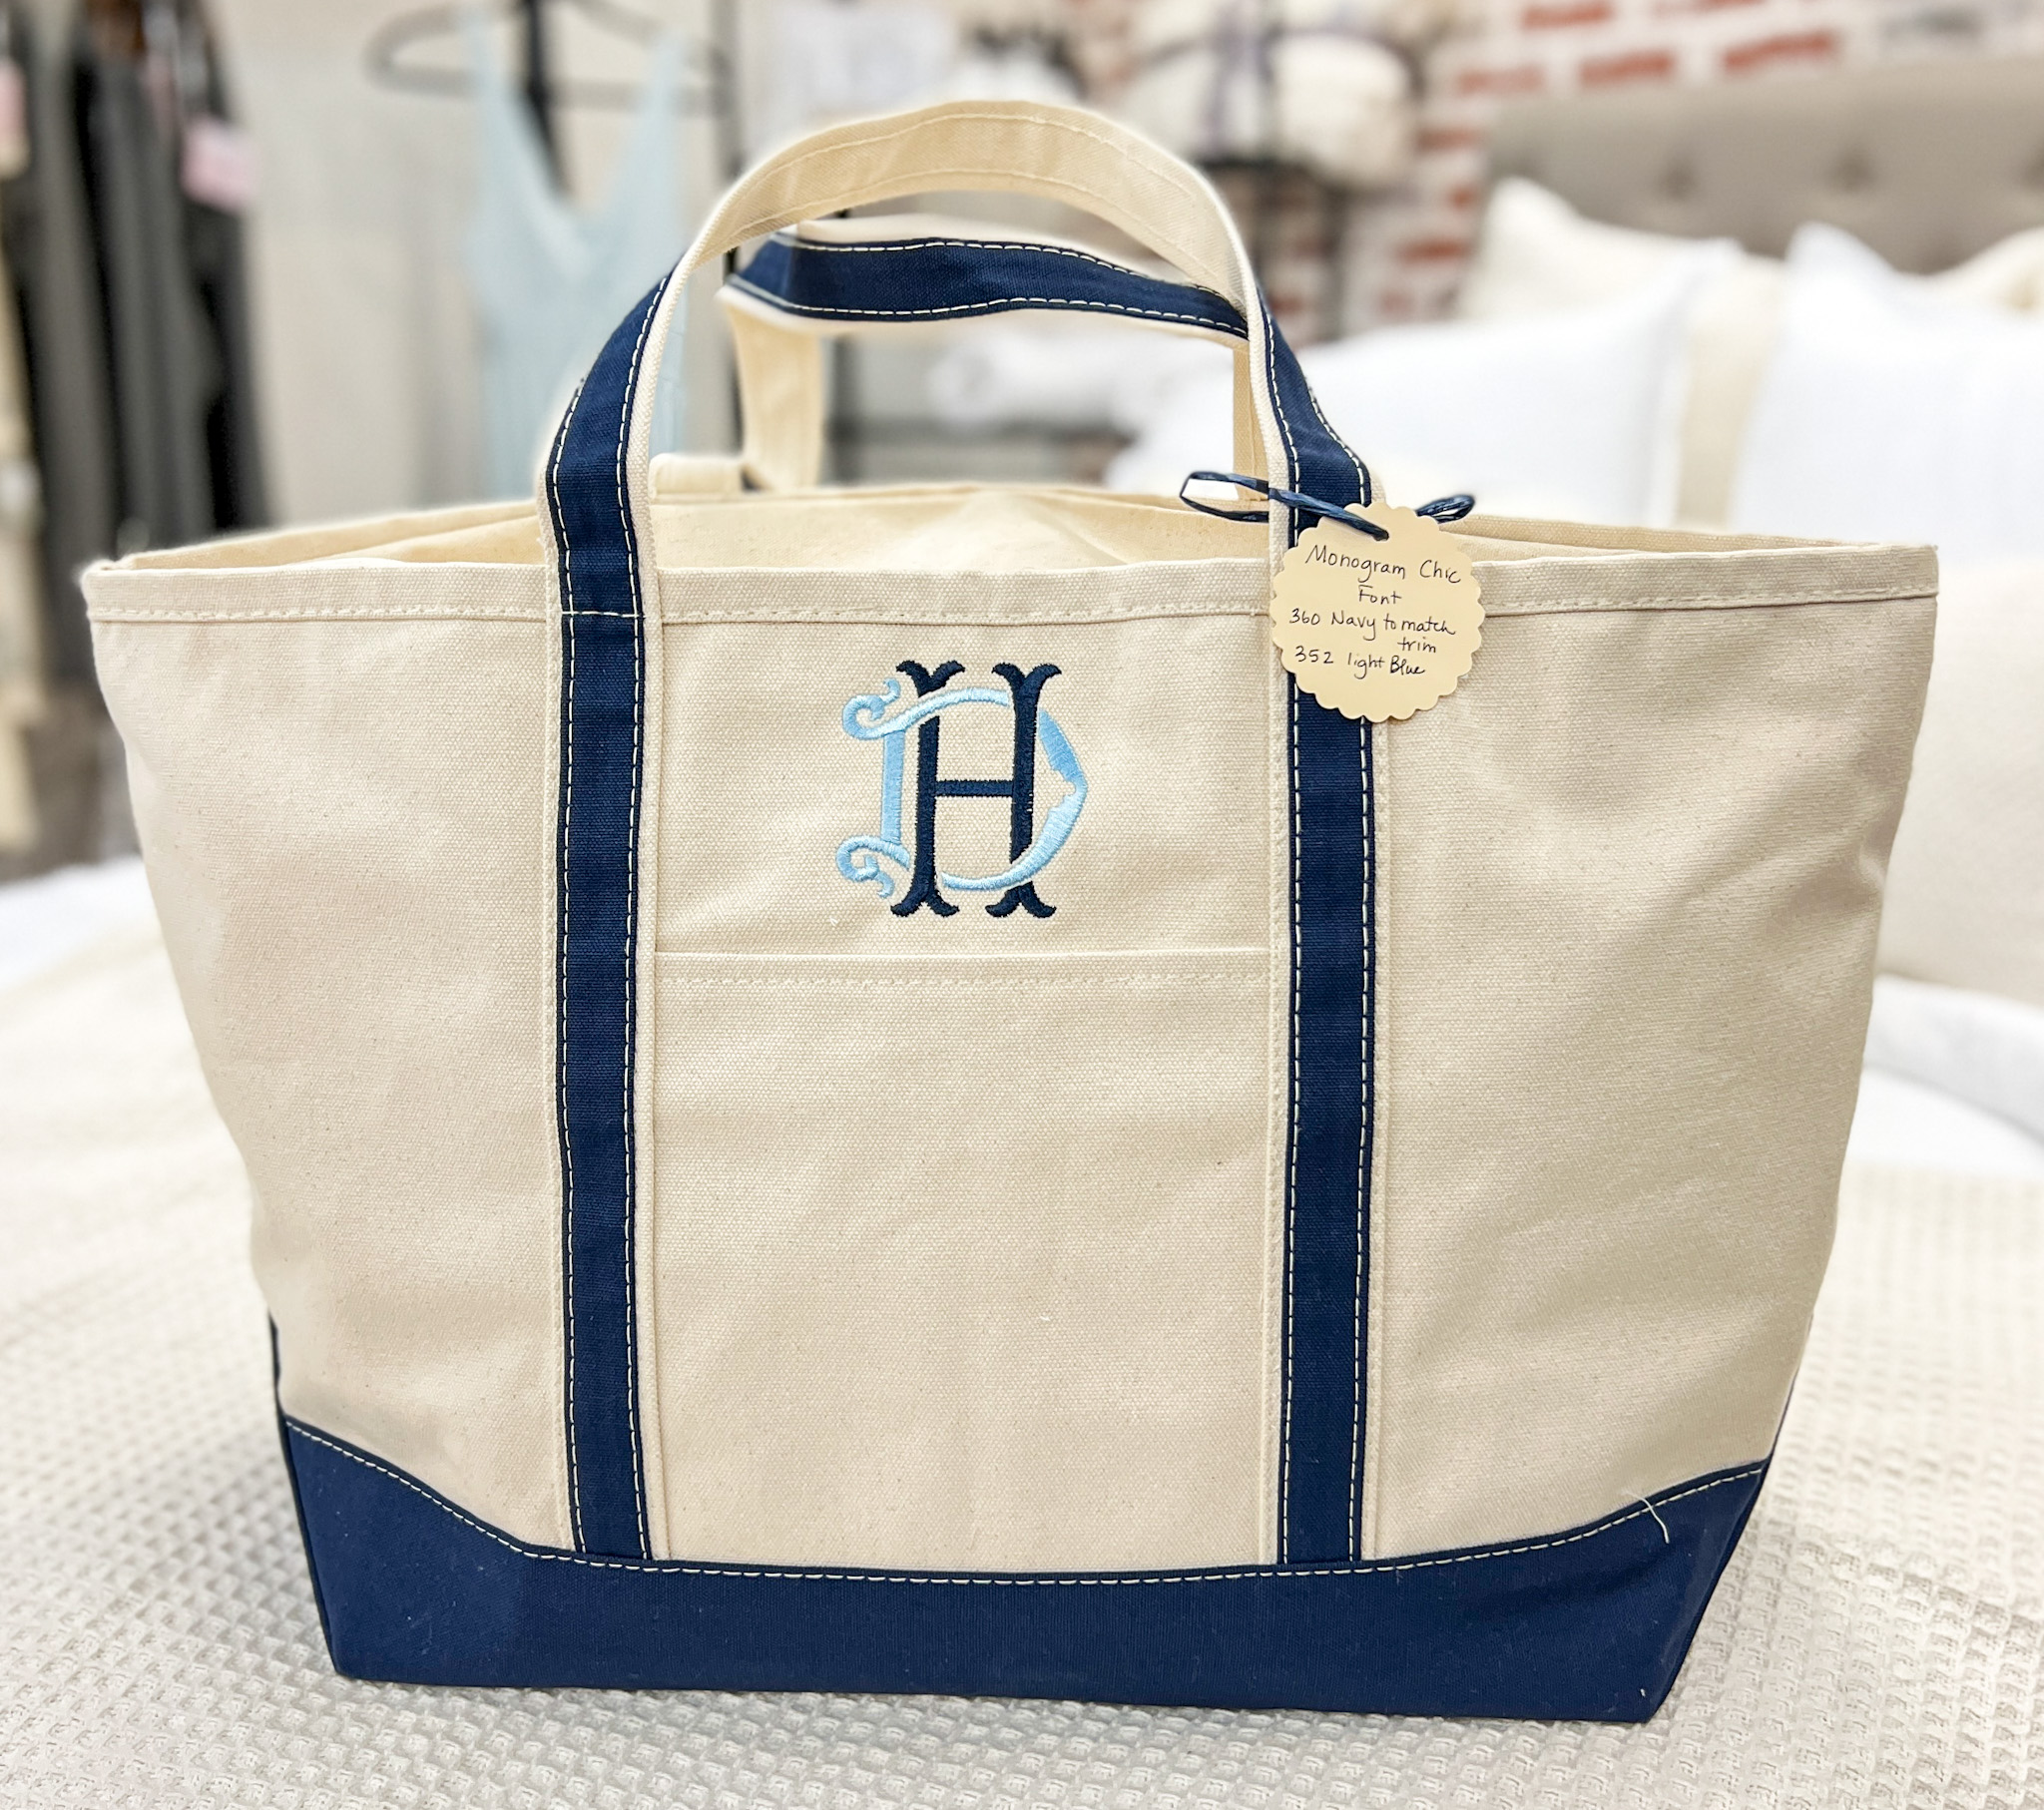 Canvas Boat Tote- Large Monogrammed Tote Perfect for Any Trip!